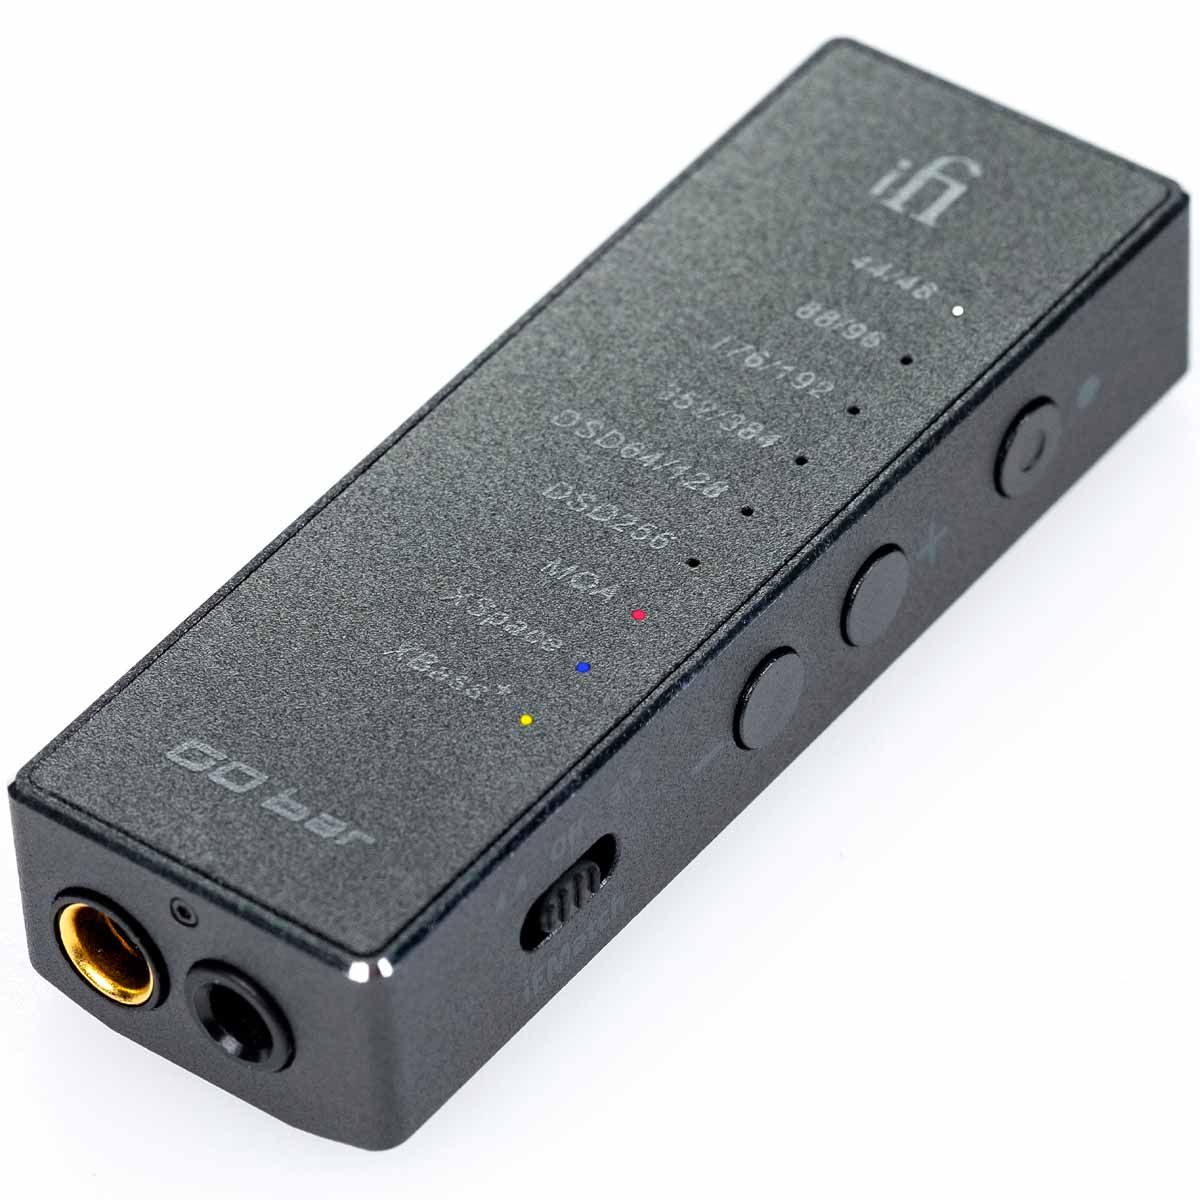 iFi GO Bar Portable Headphone Amp & DAC - angled view with outputs